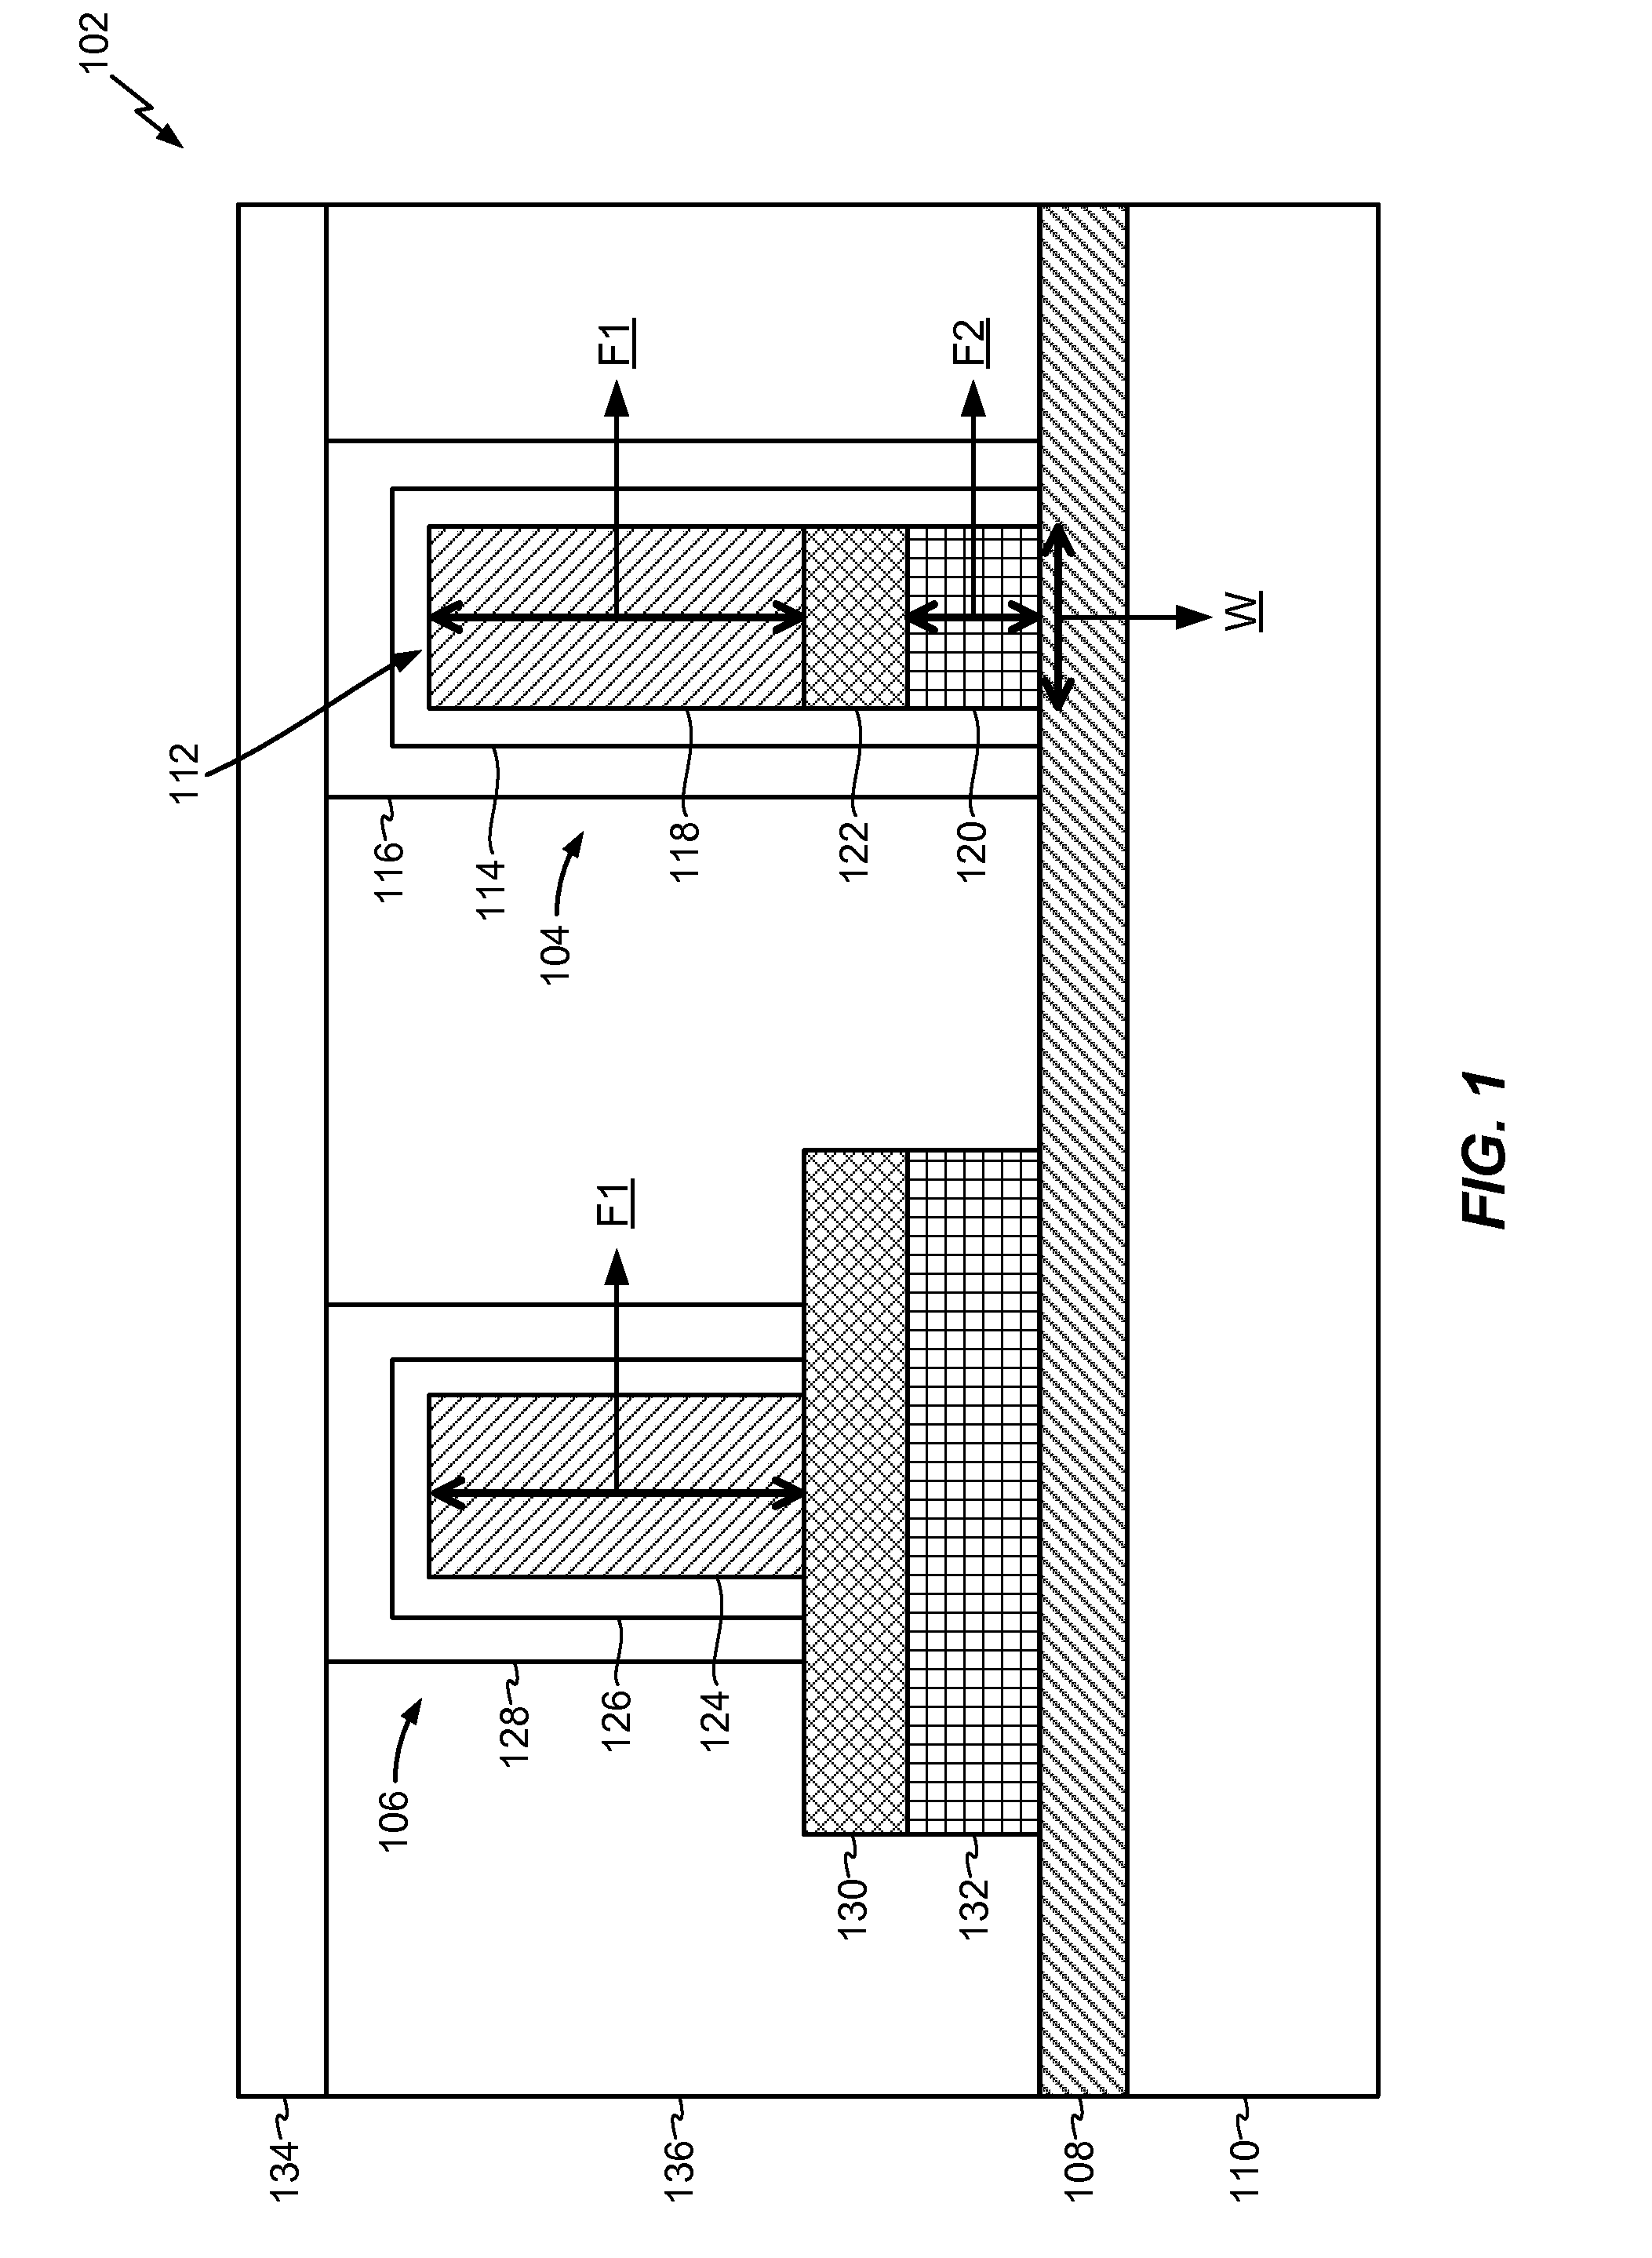 System and method of manufacturing a fin field-effect transistor having multiple fin heights